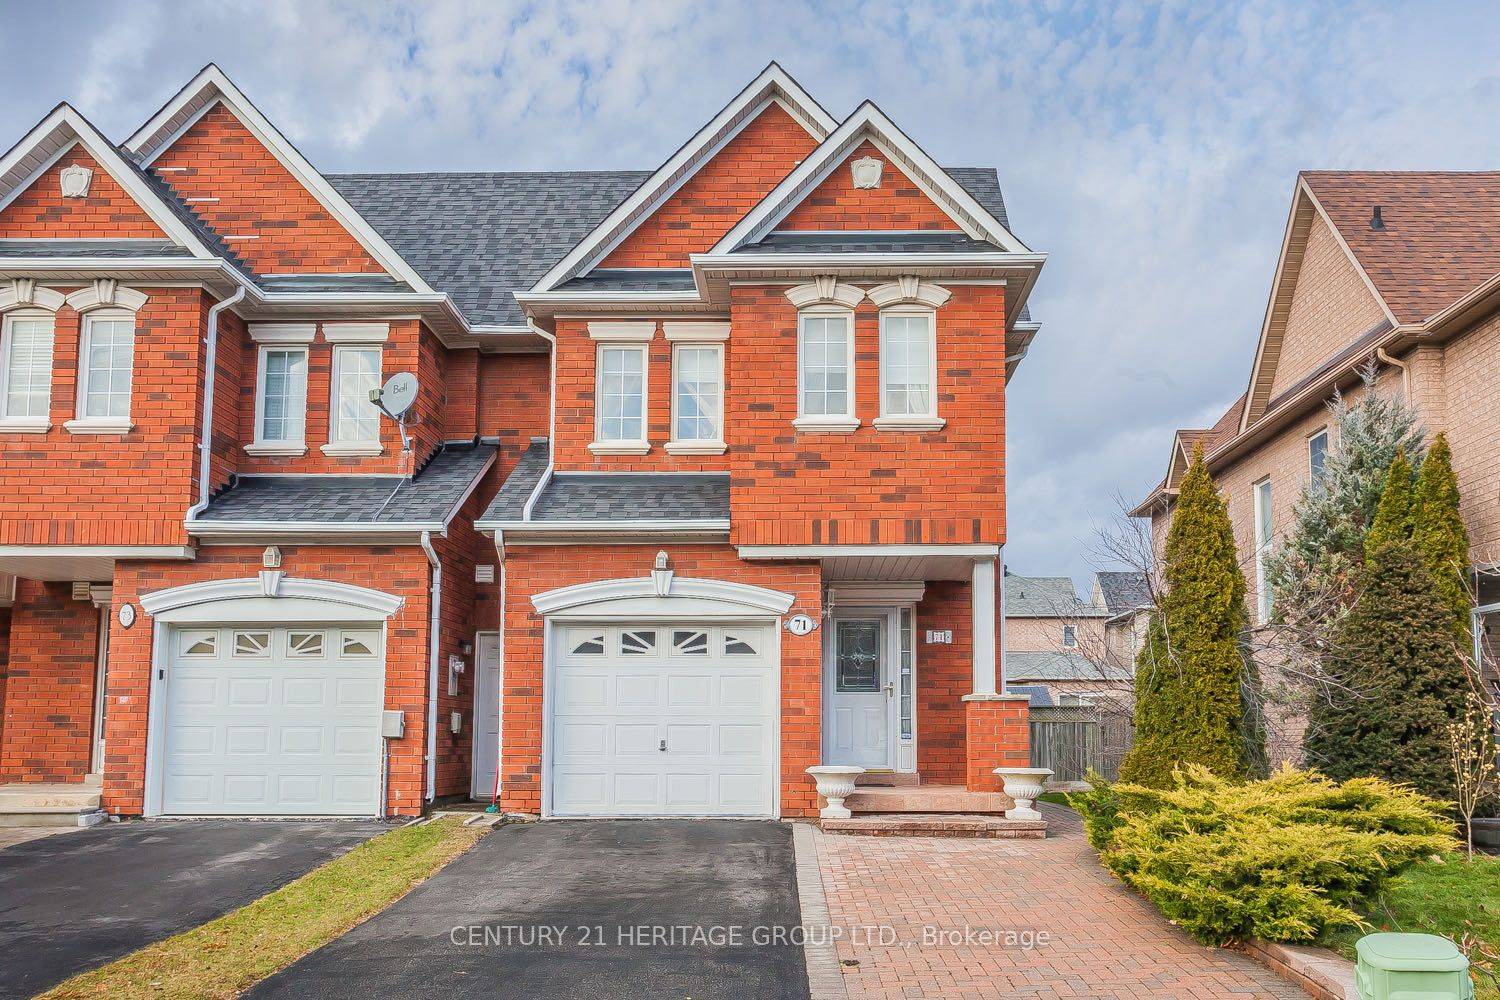 SPACIOUS END UNIT TOWNHOUSE ON A GENEROUS LOT IN THE HIGHLY DESIRABLE ROUGE WOODS COMMUNITY FLODED WITH NATURAL LIGHT.